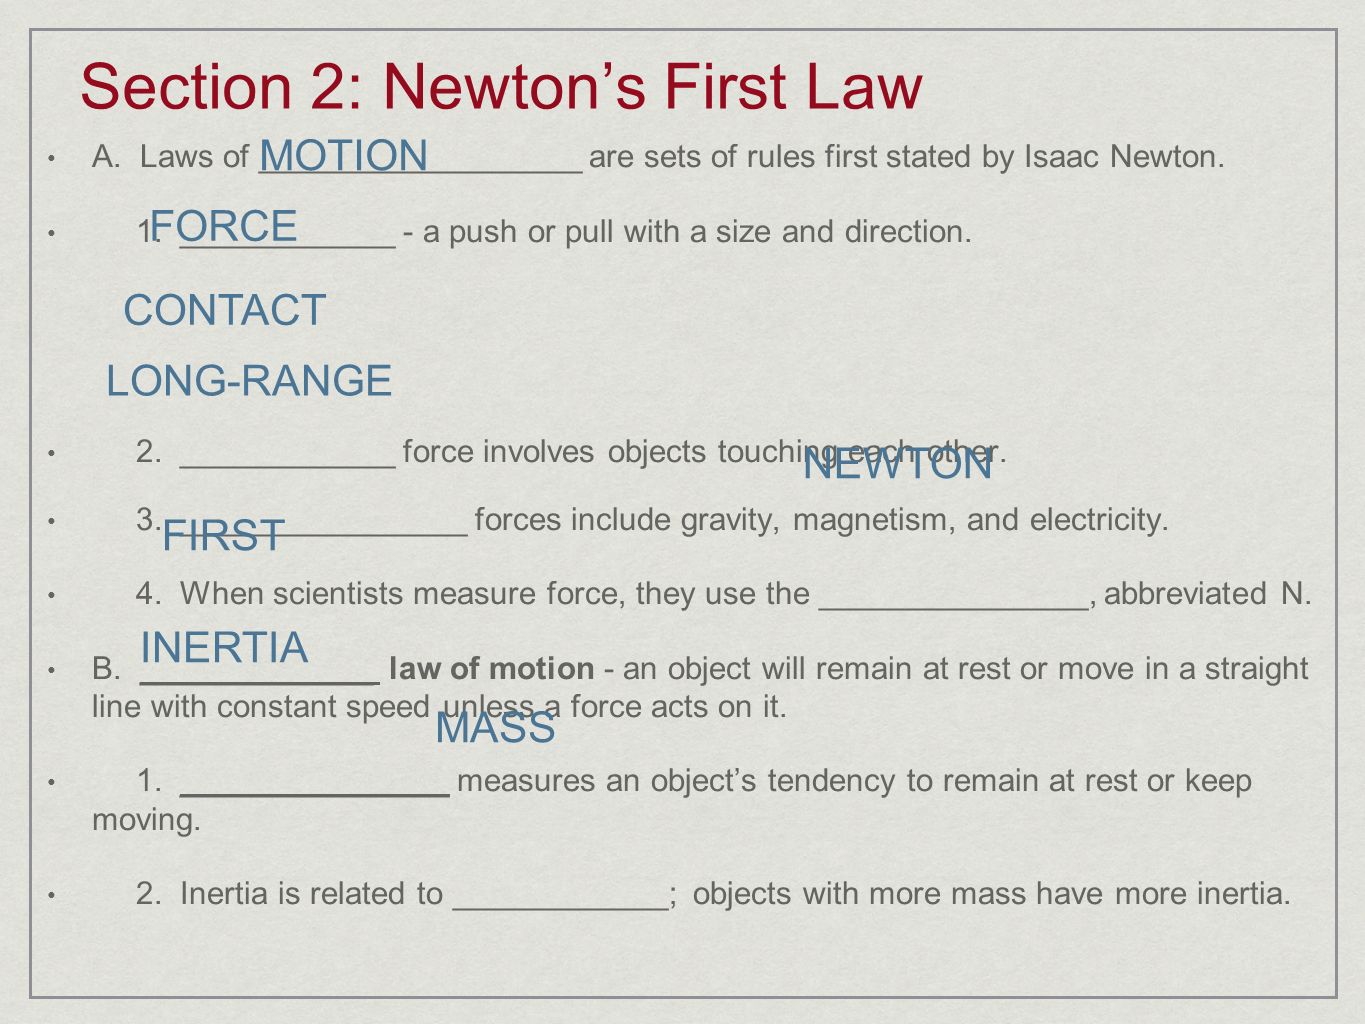 Section 2: Newton’s First Law